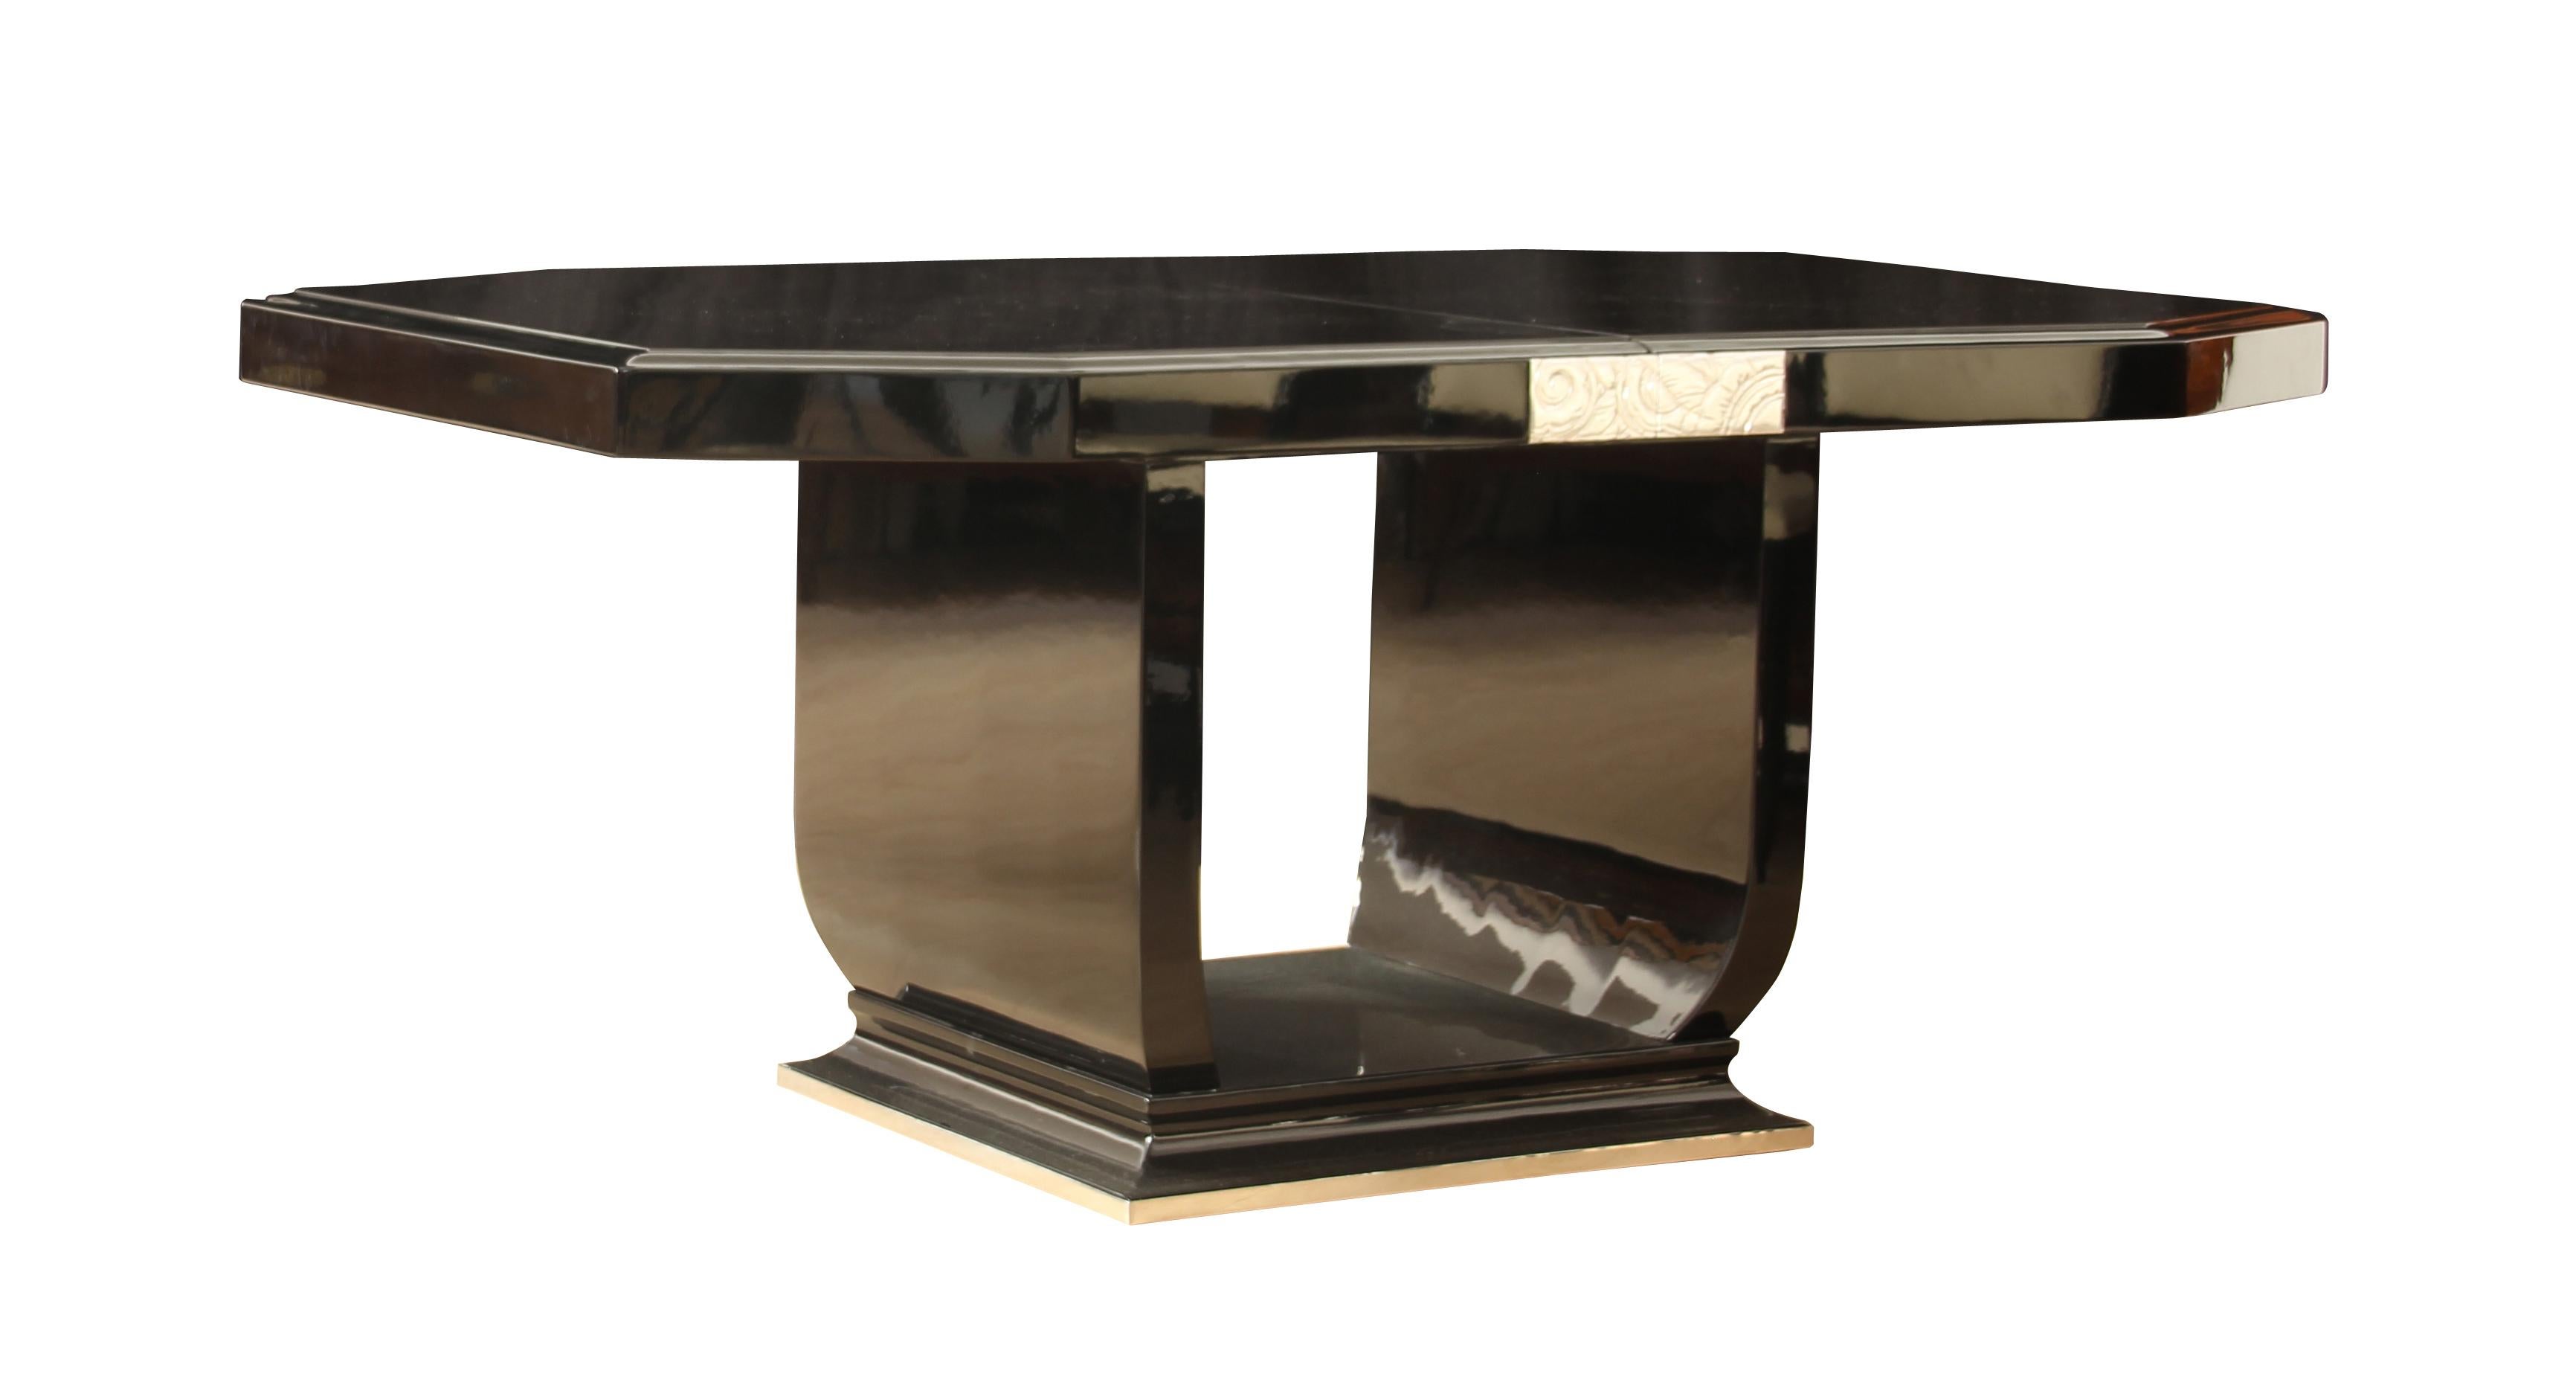 Early 20th Century Expandable Art Deco Dining Table, Black Lacquer, Silver Plated, Paris circa 1925